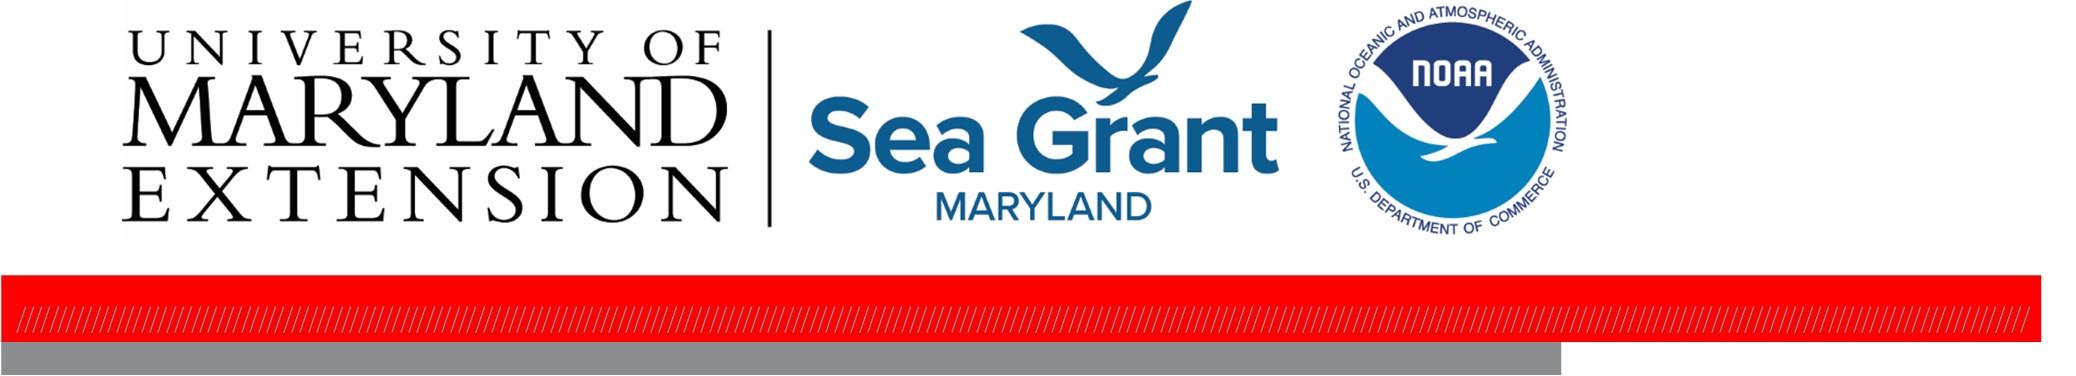 Publication header with logo containing UME, Sea Grant Maryland, and NOAA.